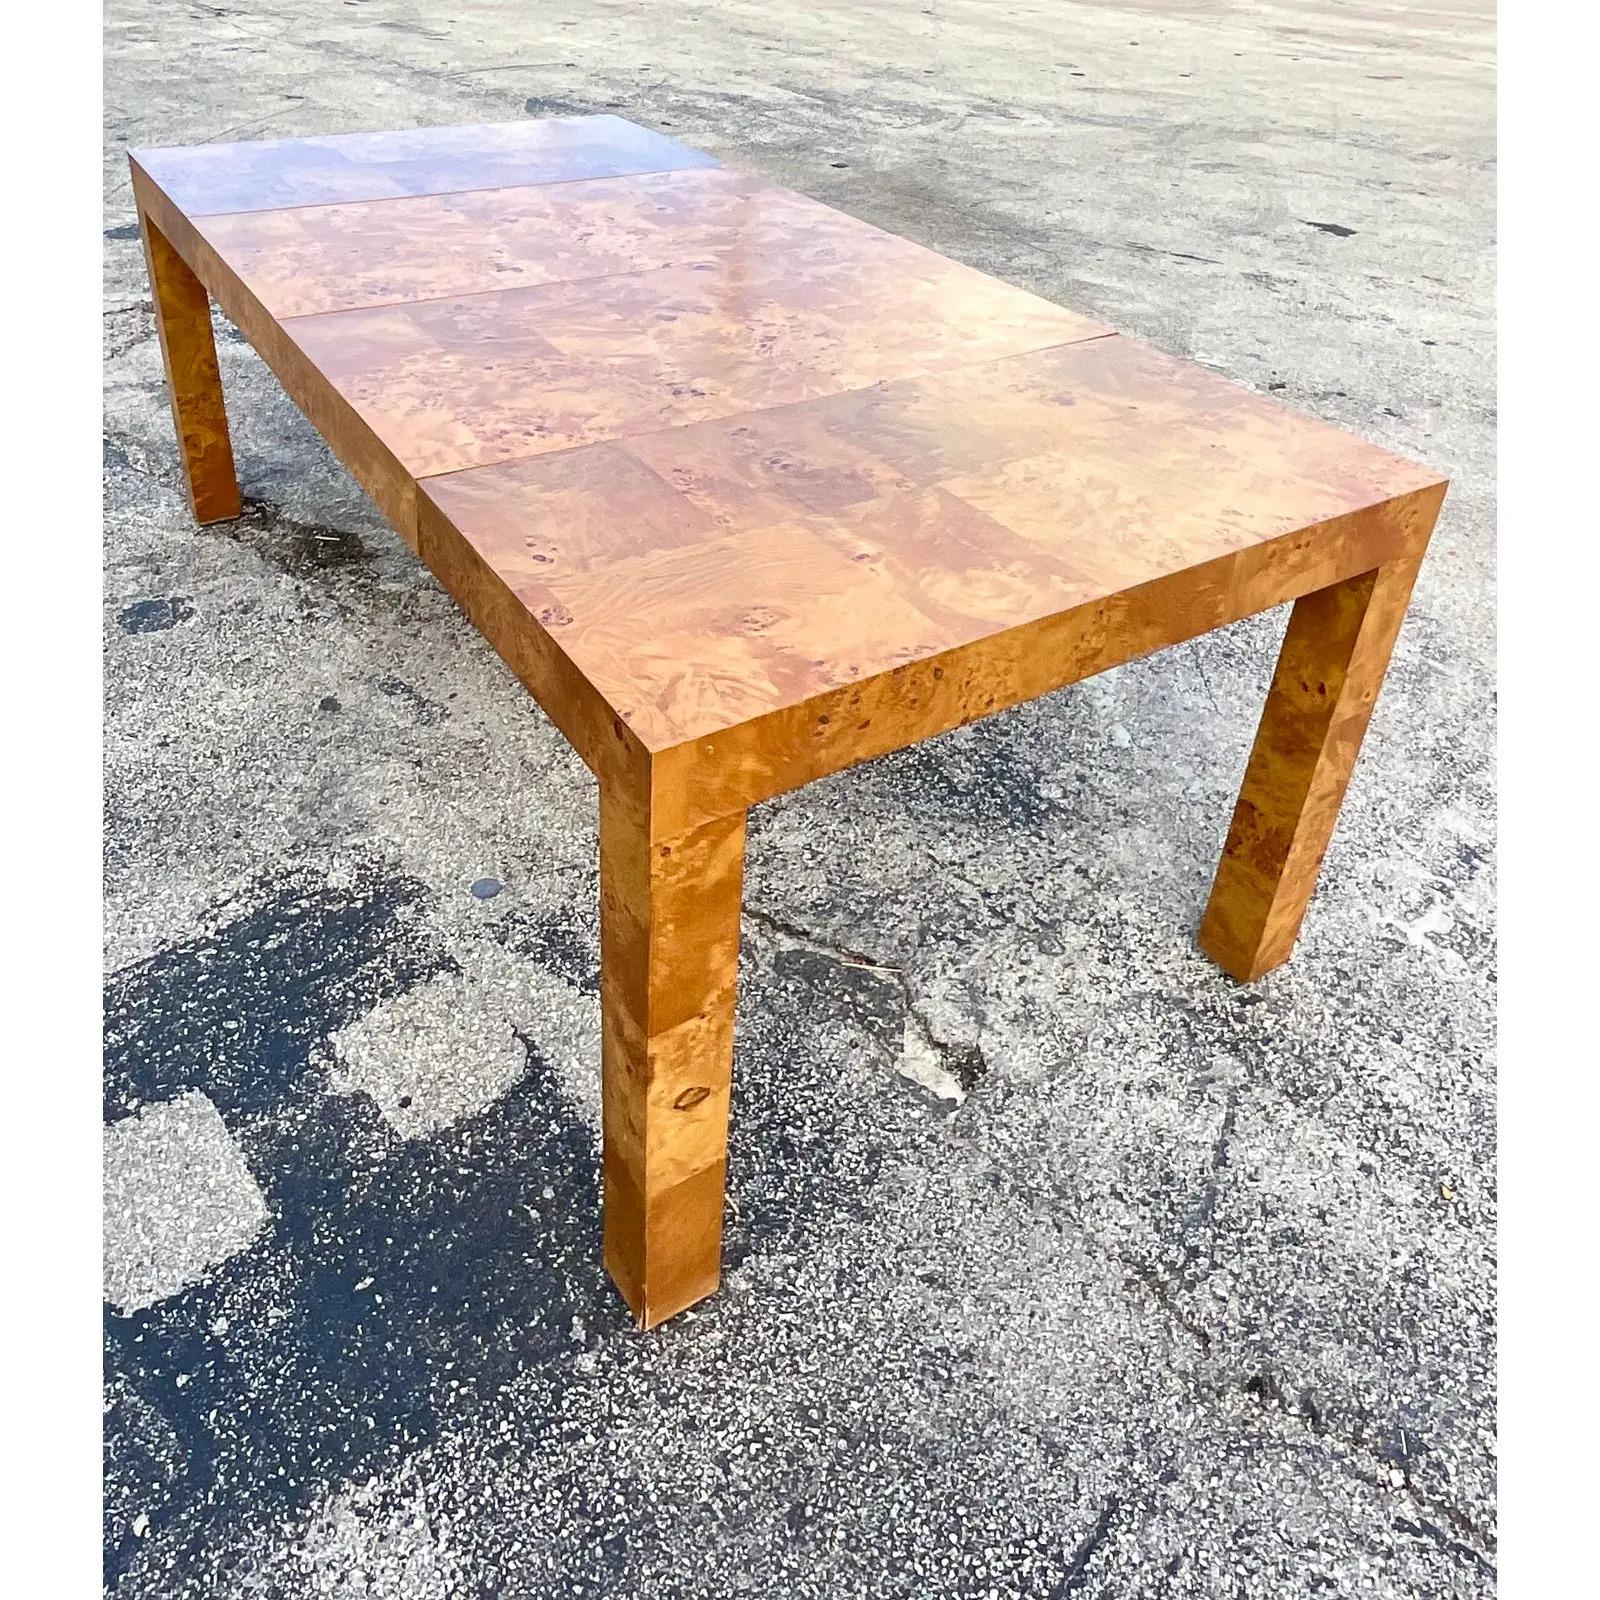 North American Vintage Midcentury Patchwork Burl Wood Parsons Dining Table After Milo Baughman For Sale